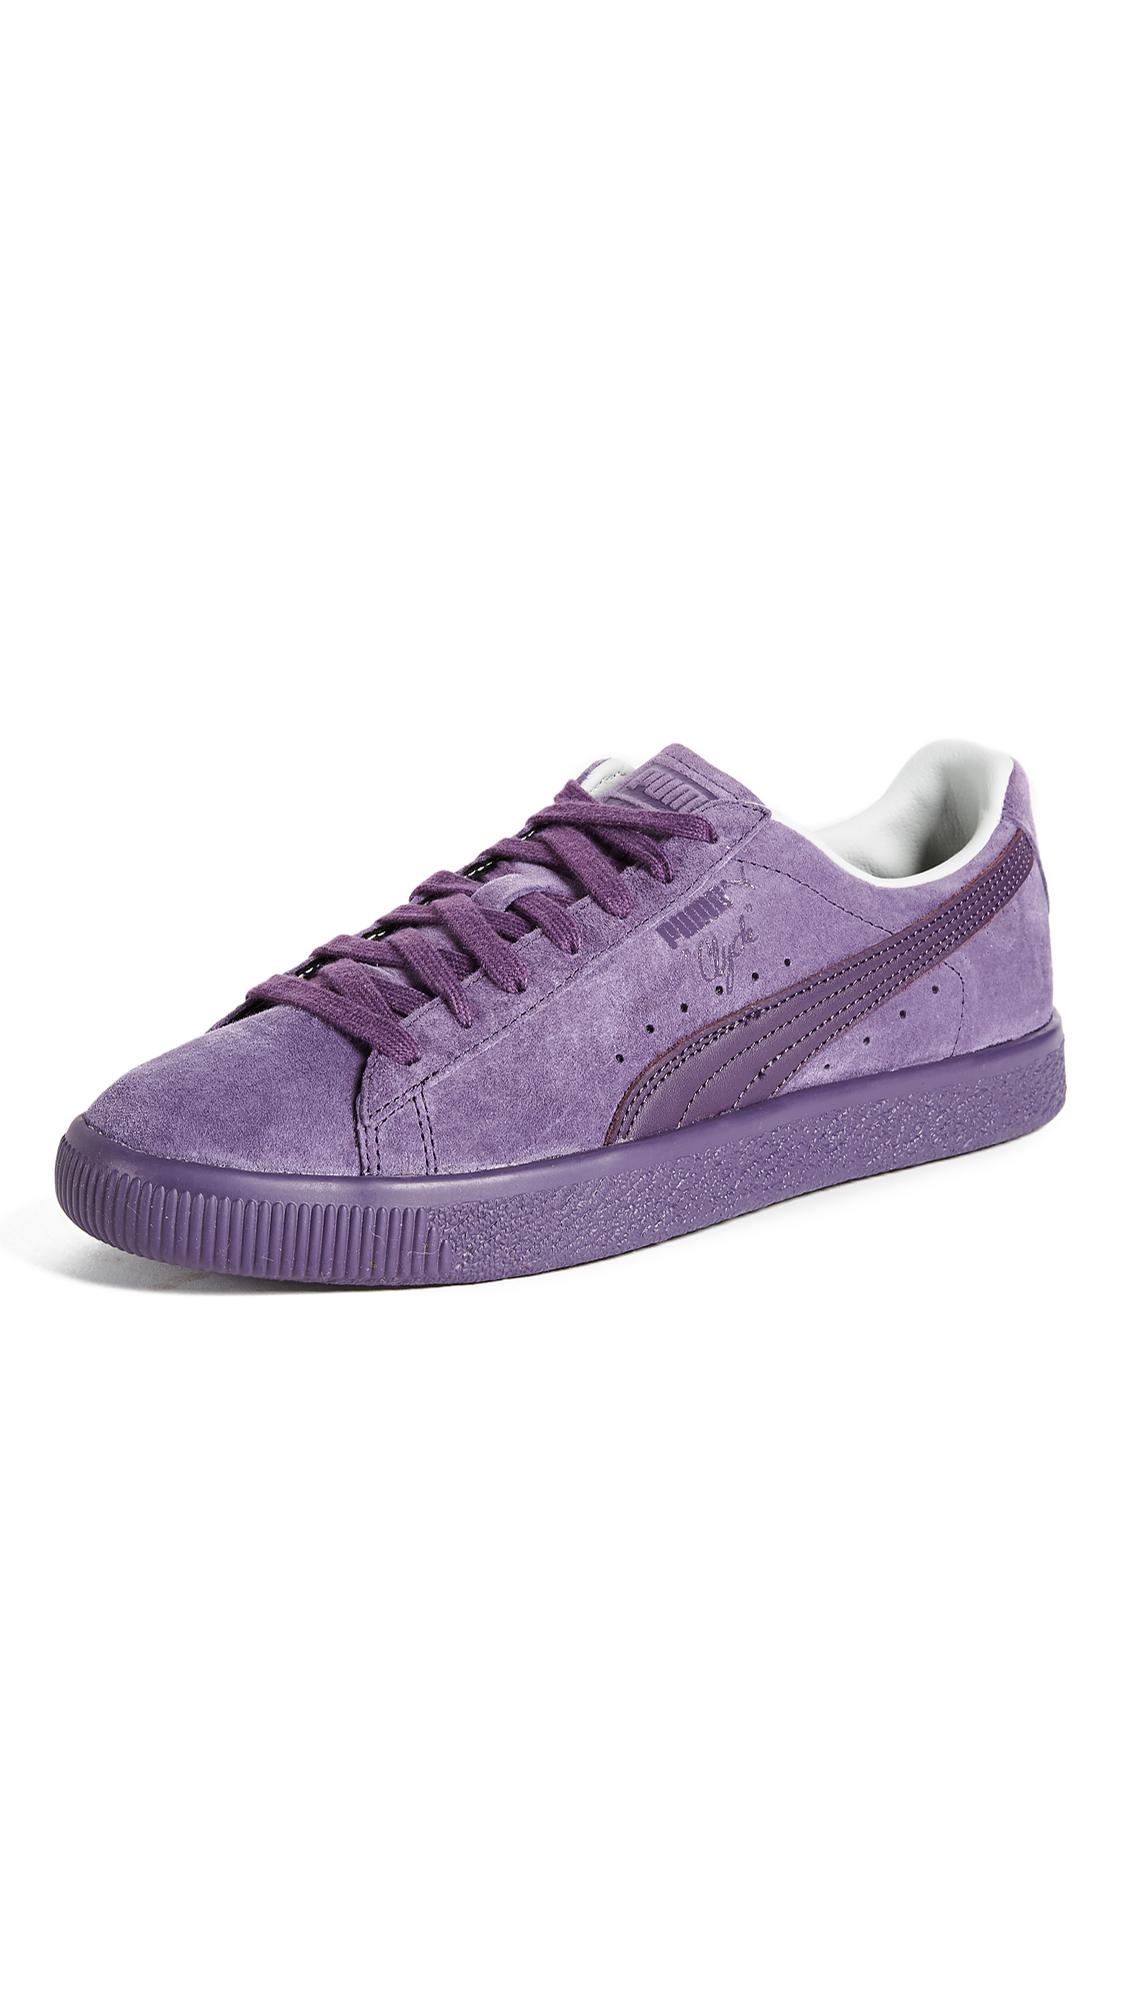 Puma Select Suede Clyde Normcore Sneakers in Purple for Men - Lyst